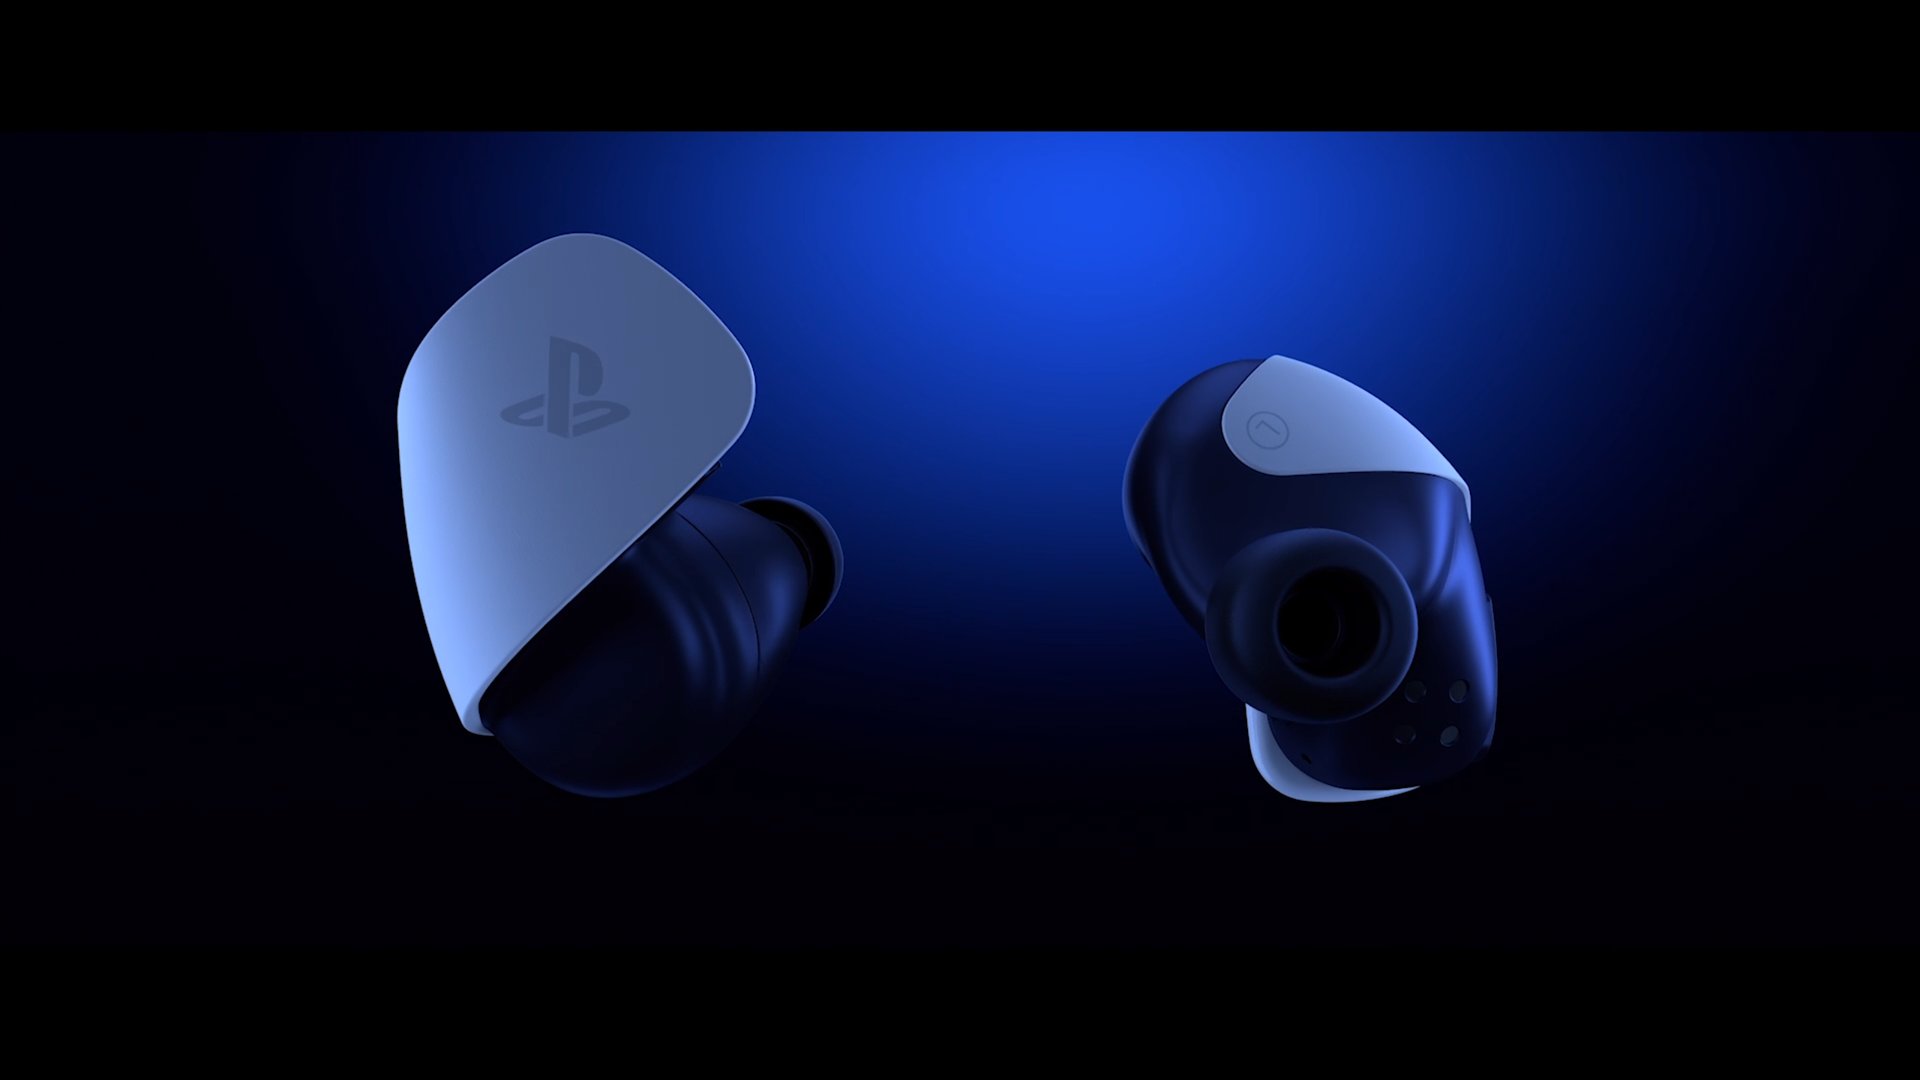 PlayStation earbuds